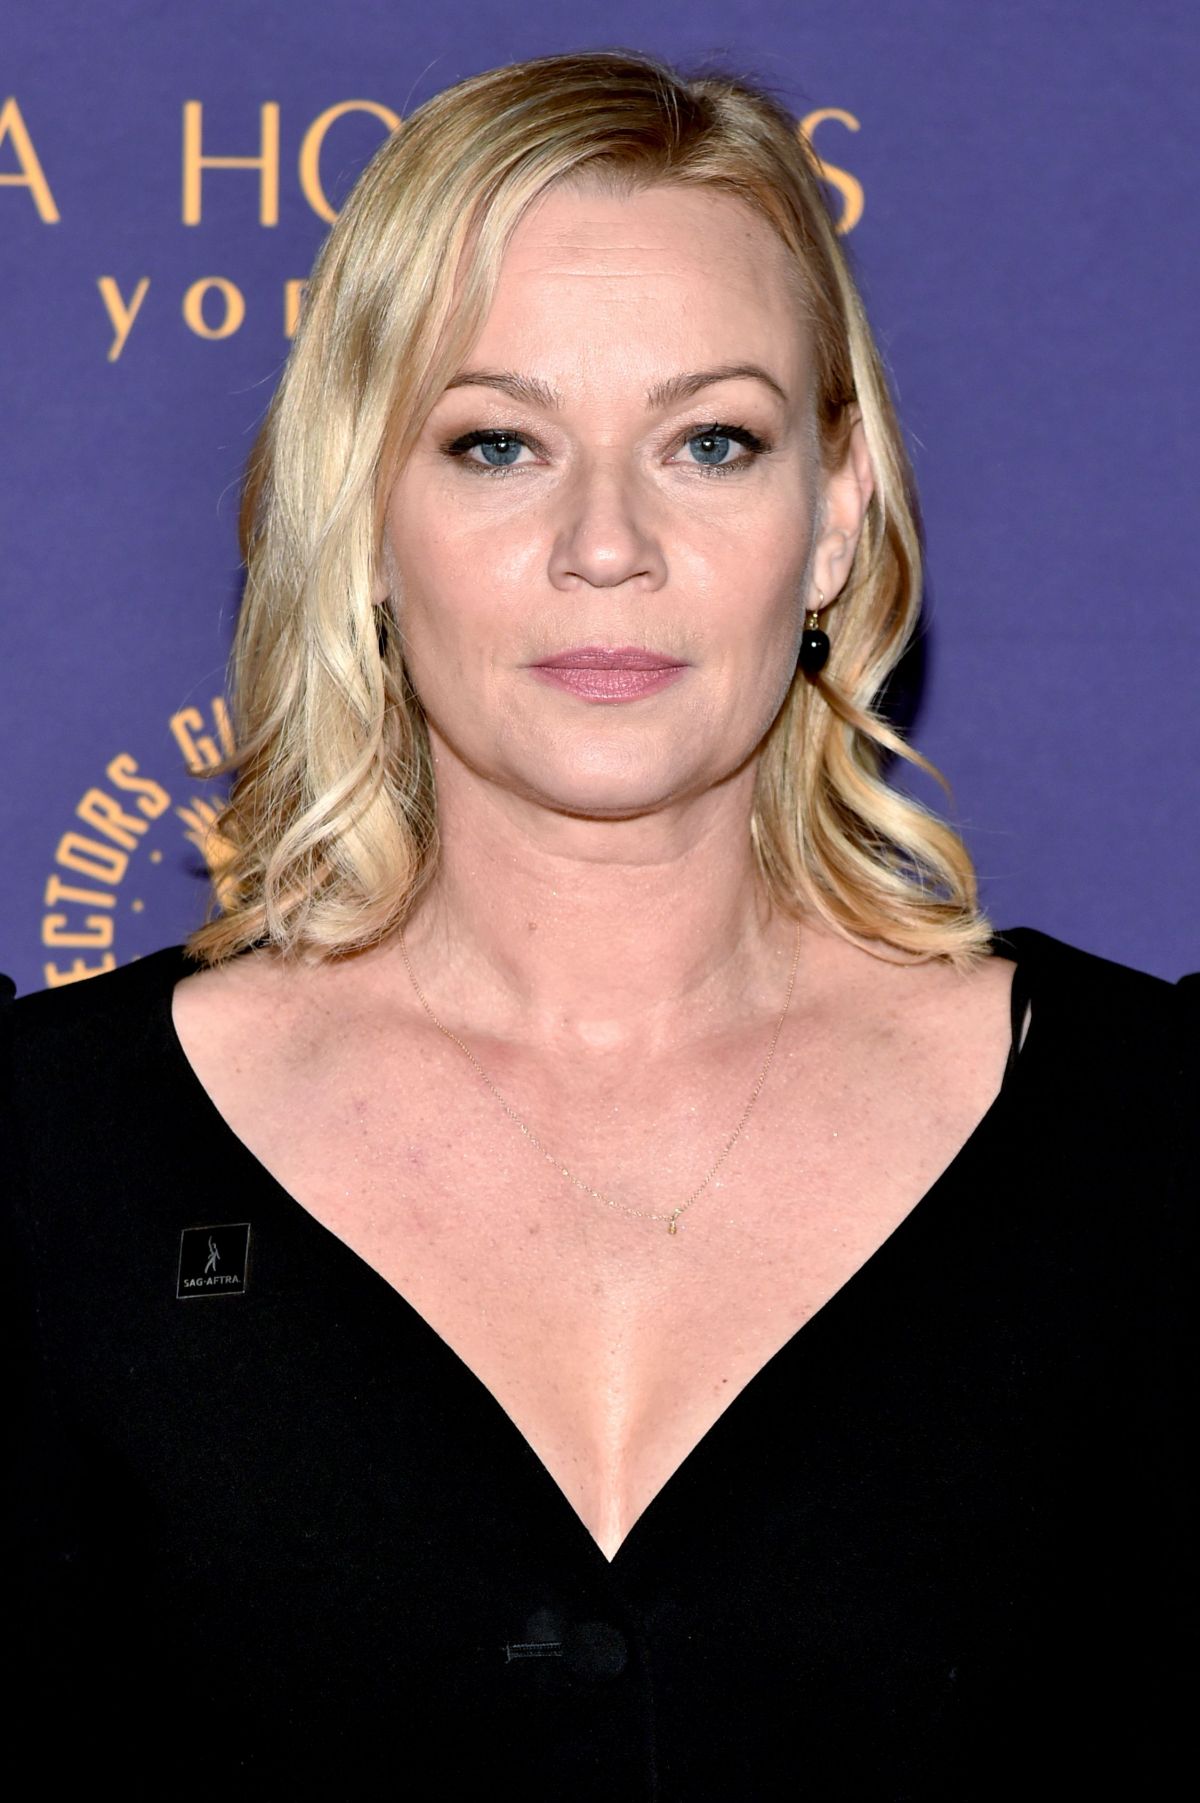 SAMANTHA MATHIS at Directors Guild of America Honors in New York 10/18/2018...